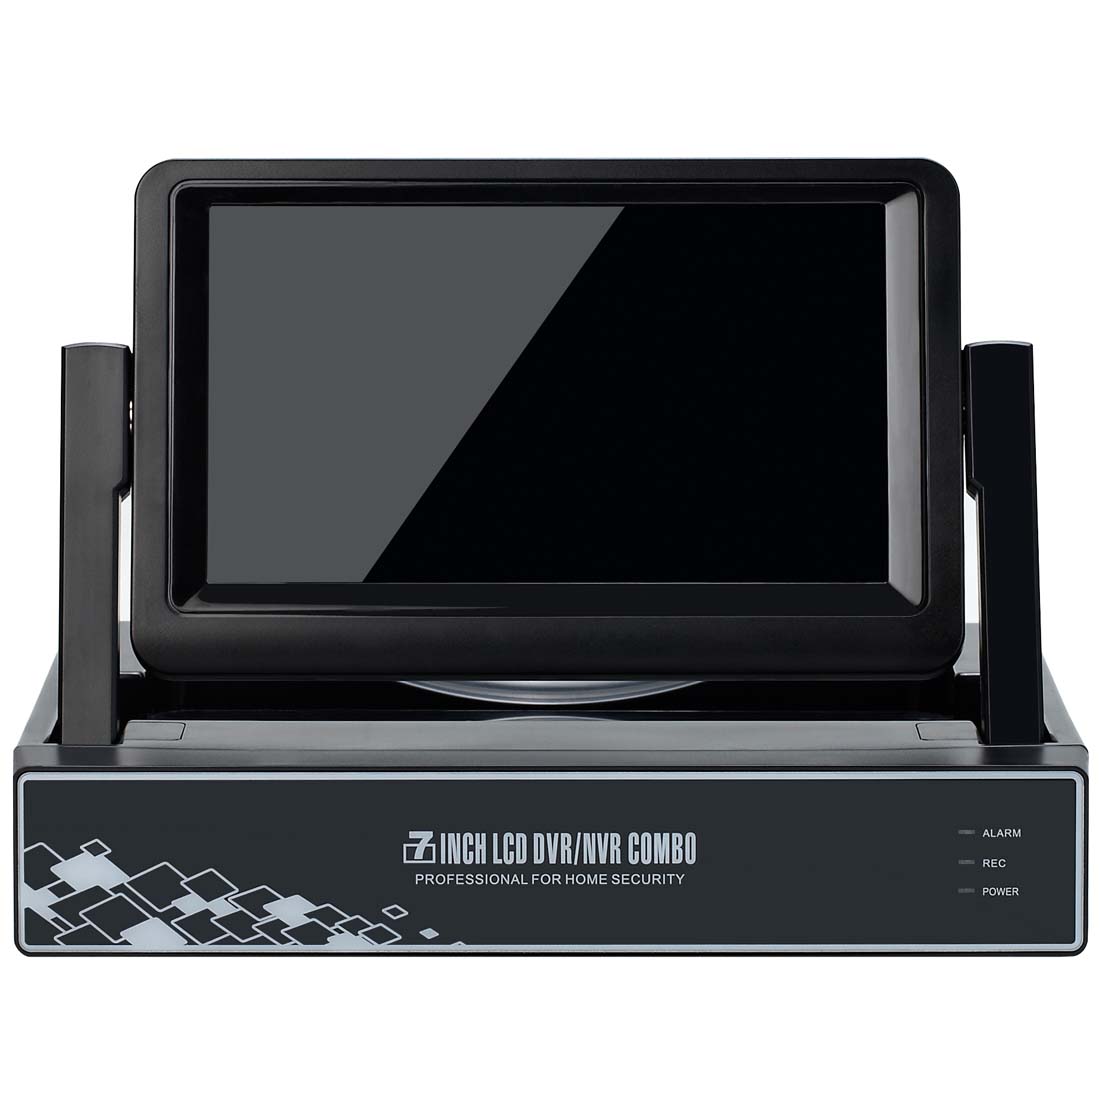 nvr 8ch with 7inch LCD